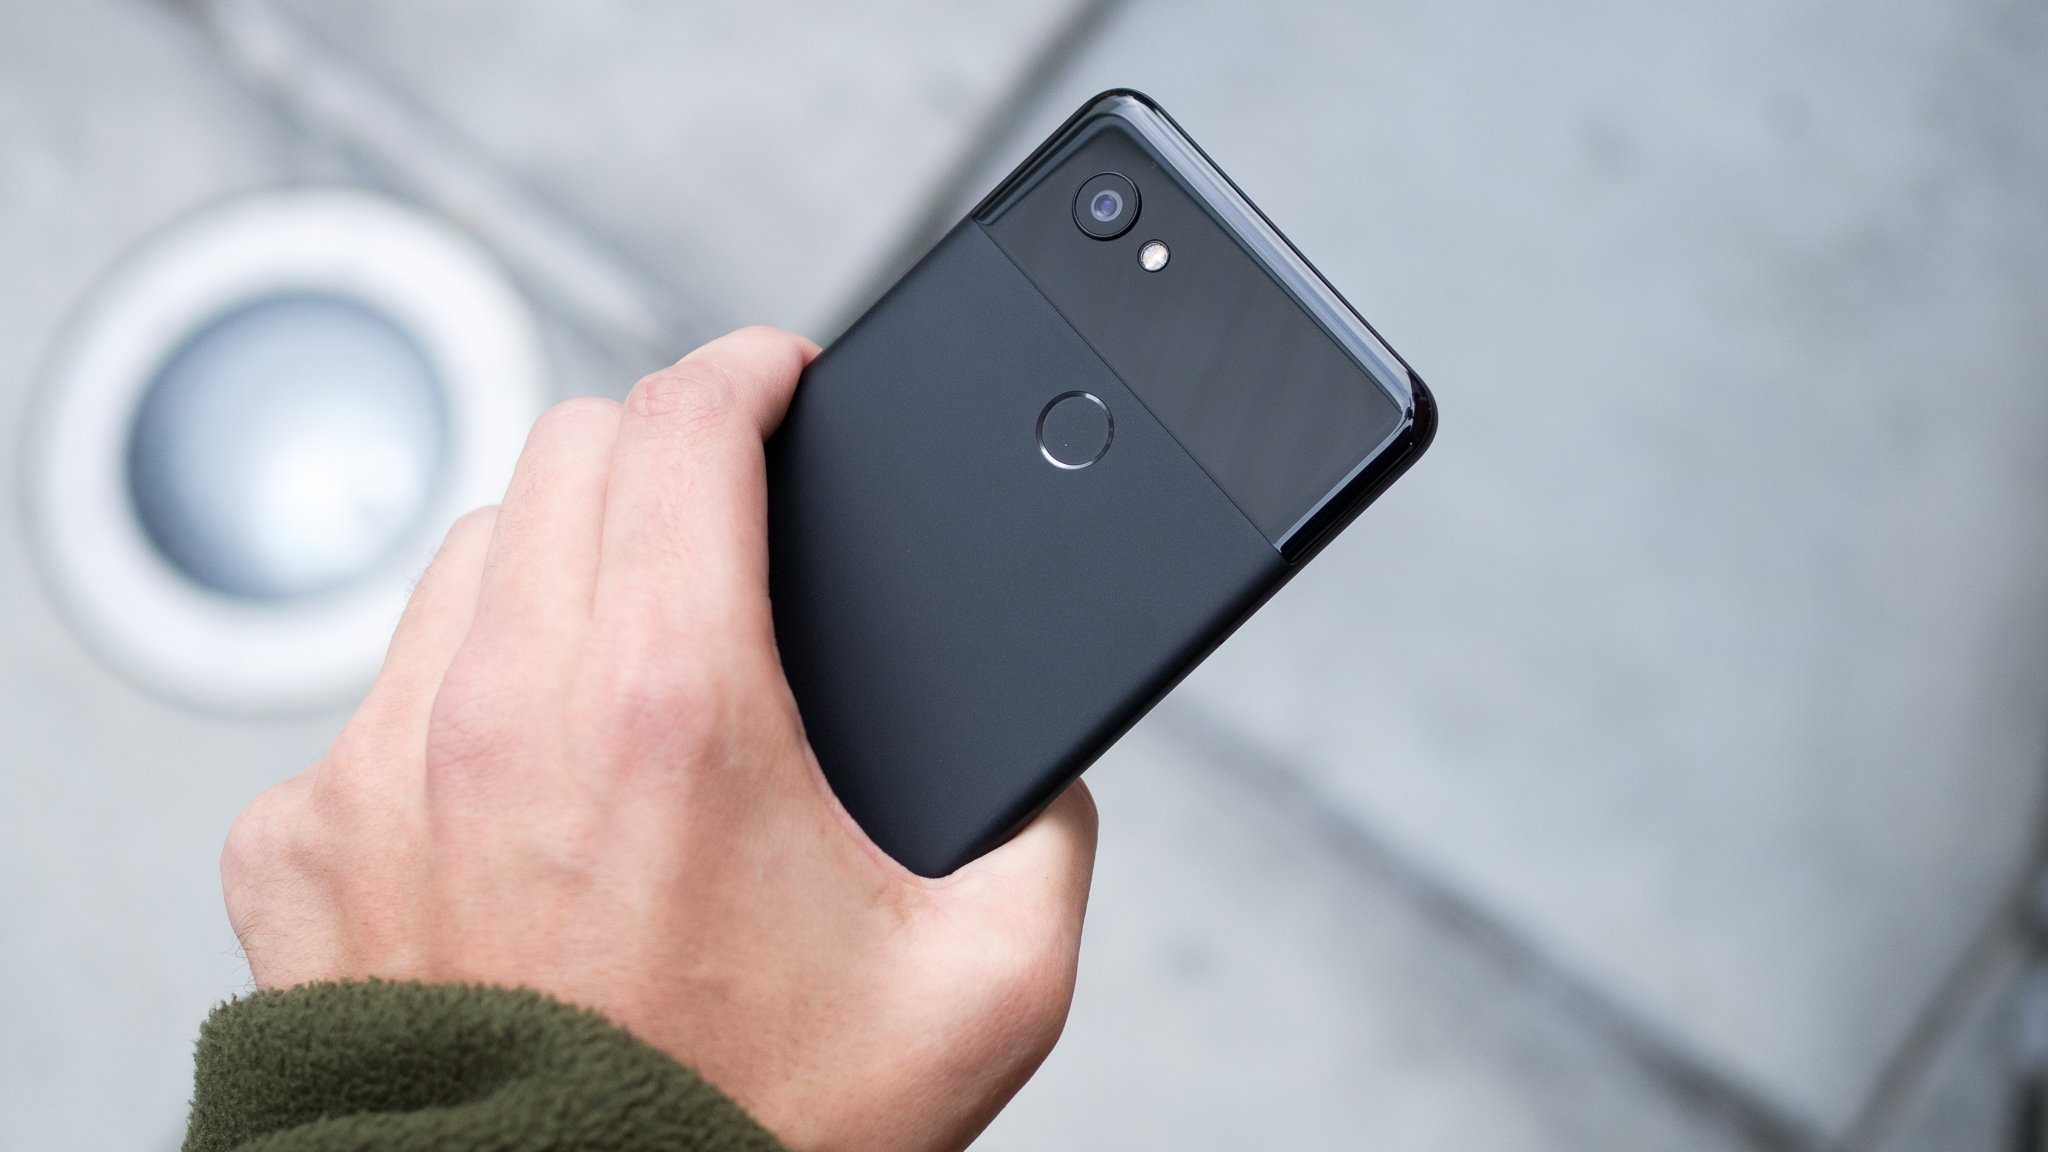 Google Pixel 2 devices can now run Android 13 with LineageOS 20